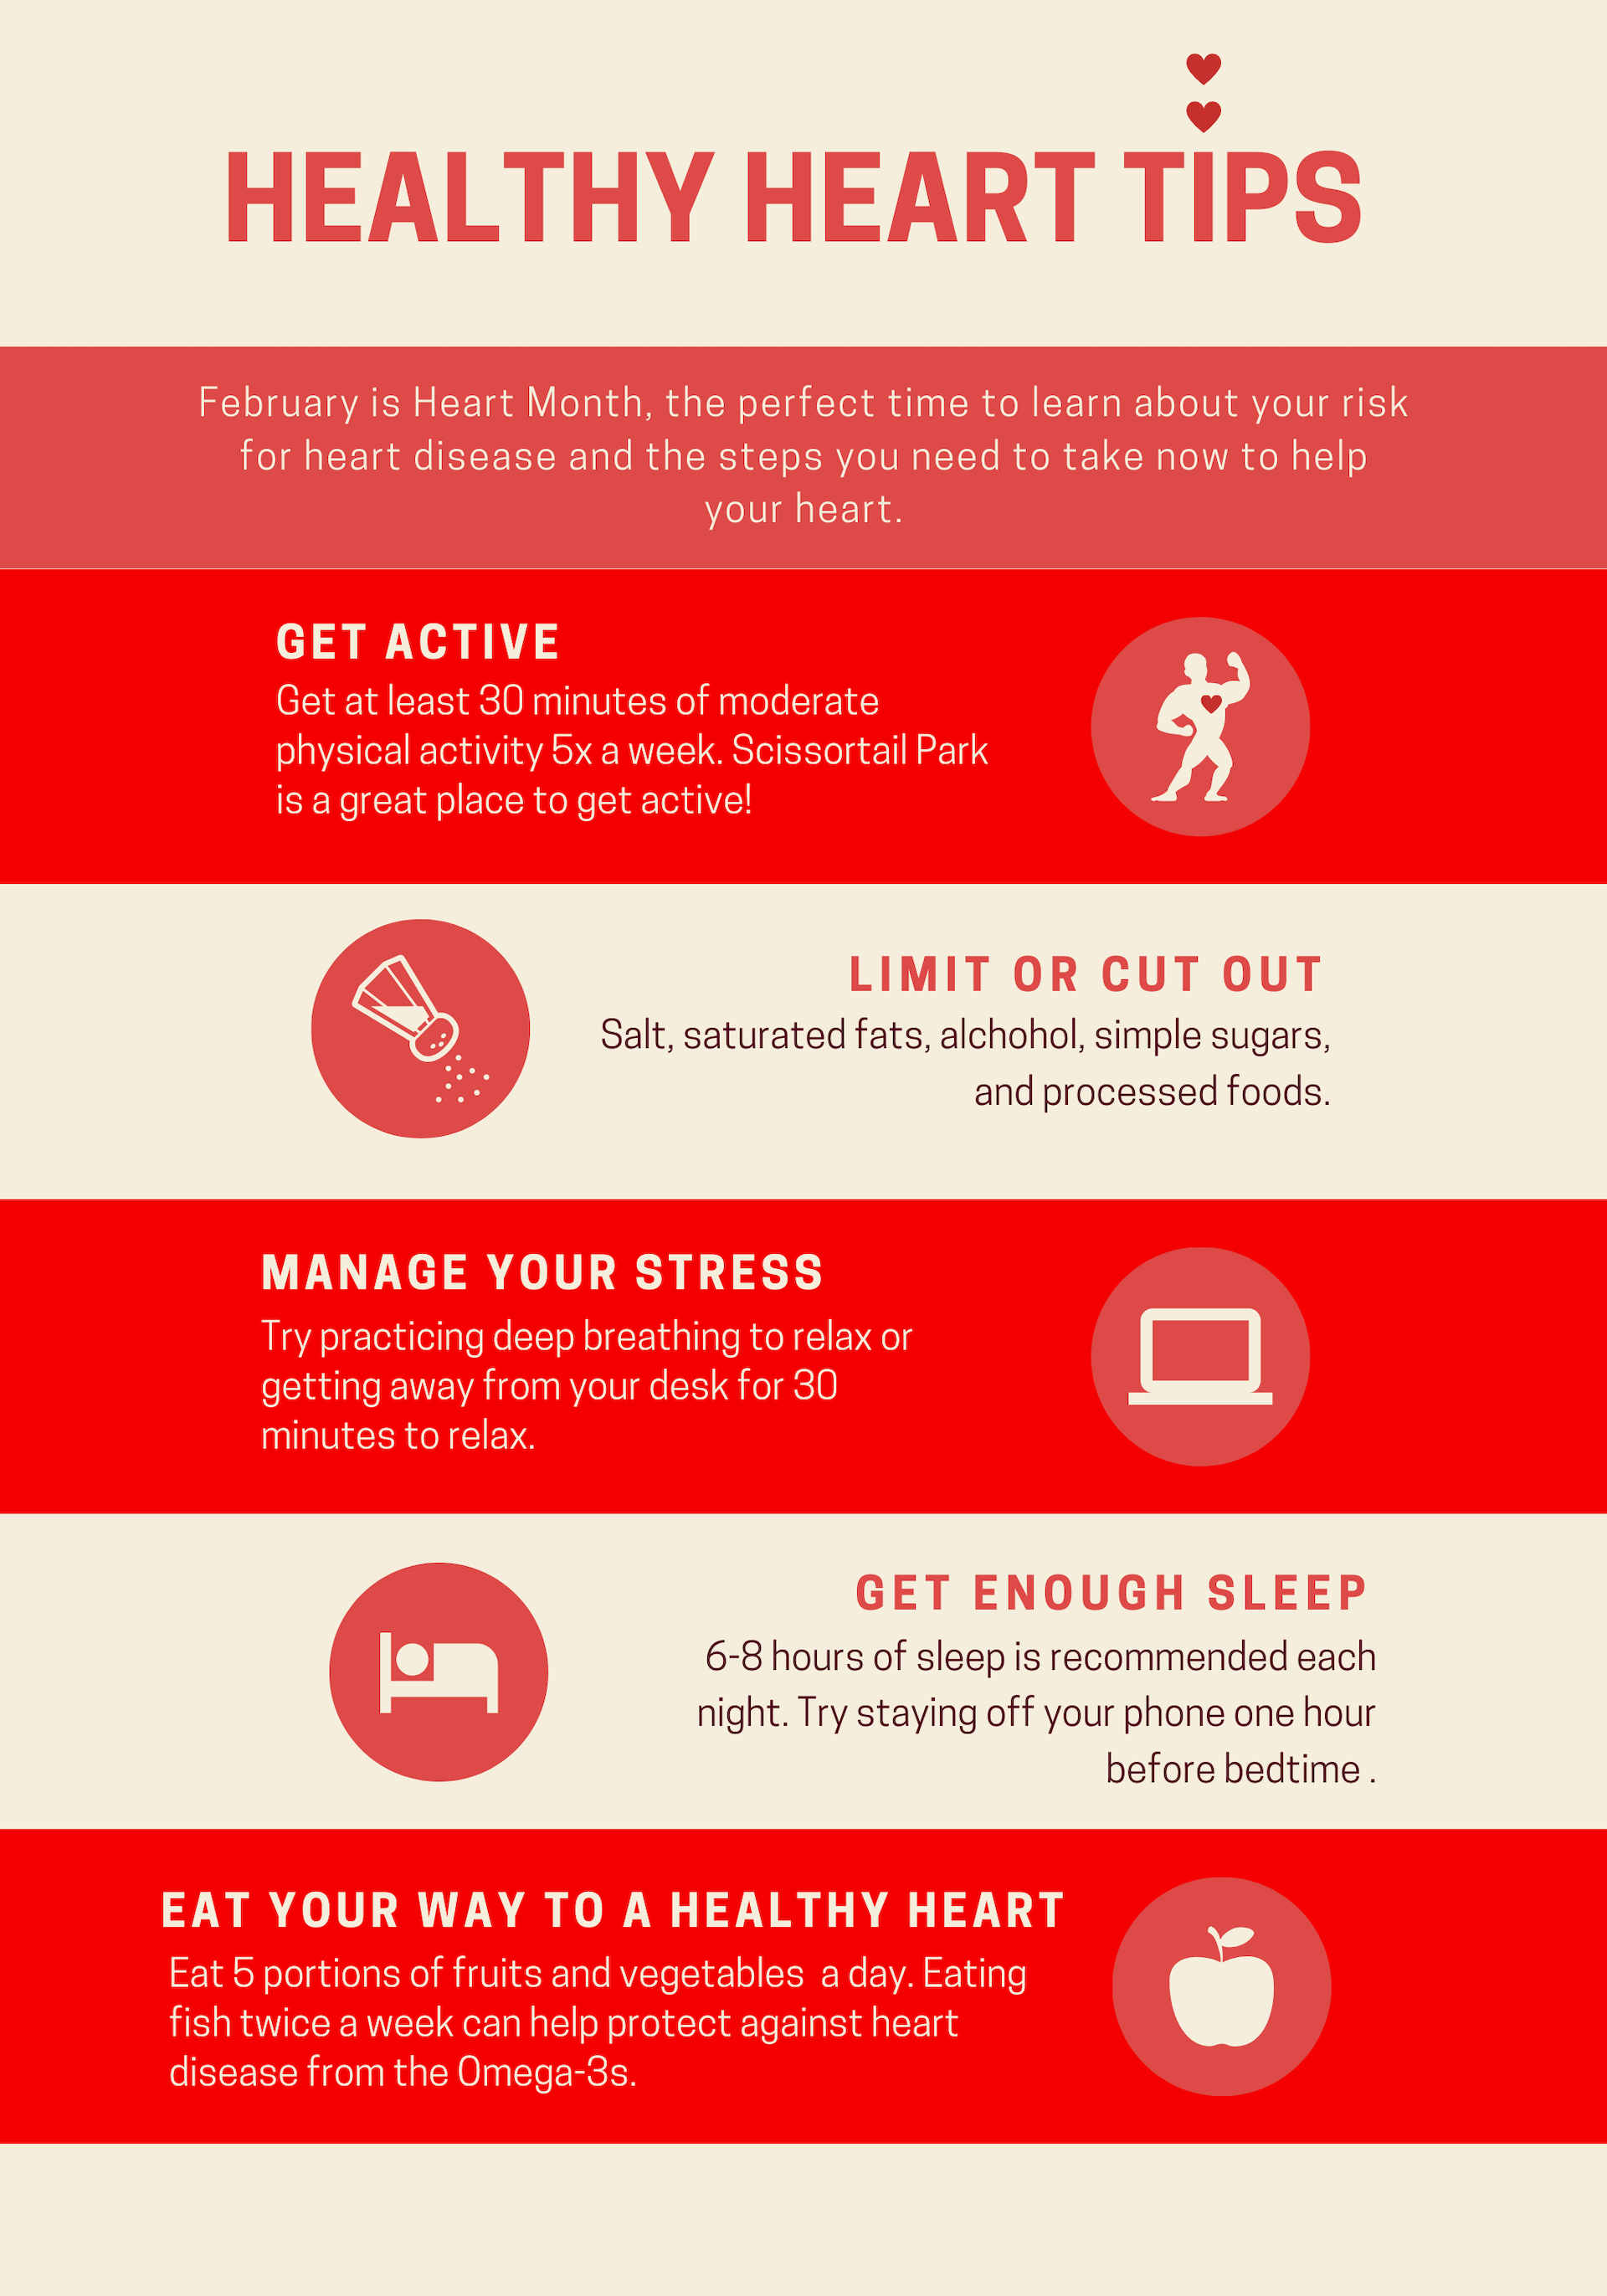 Heart Health Awareness February 2020 Healthy Heart TipsFIt405.png